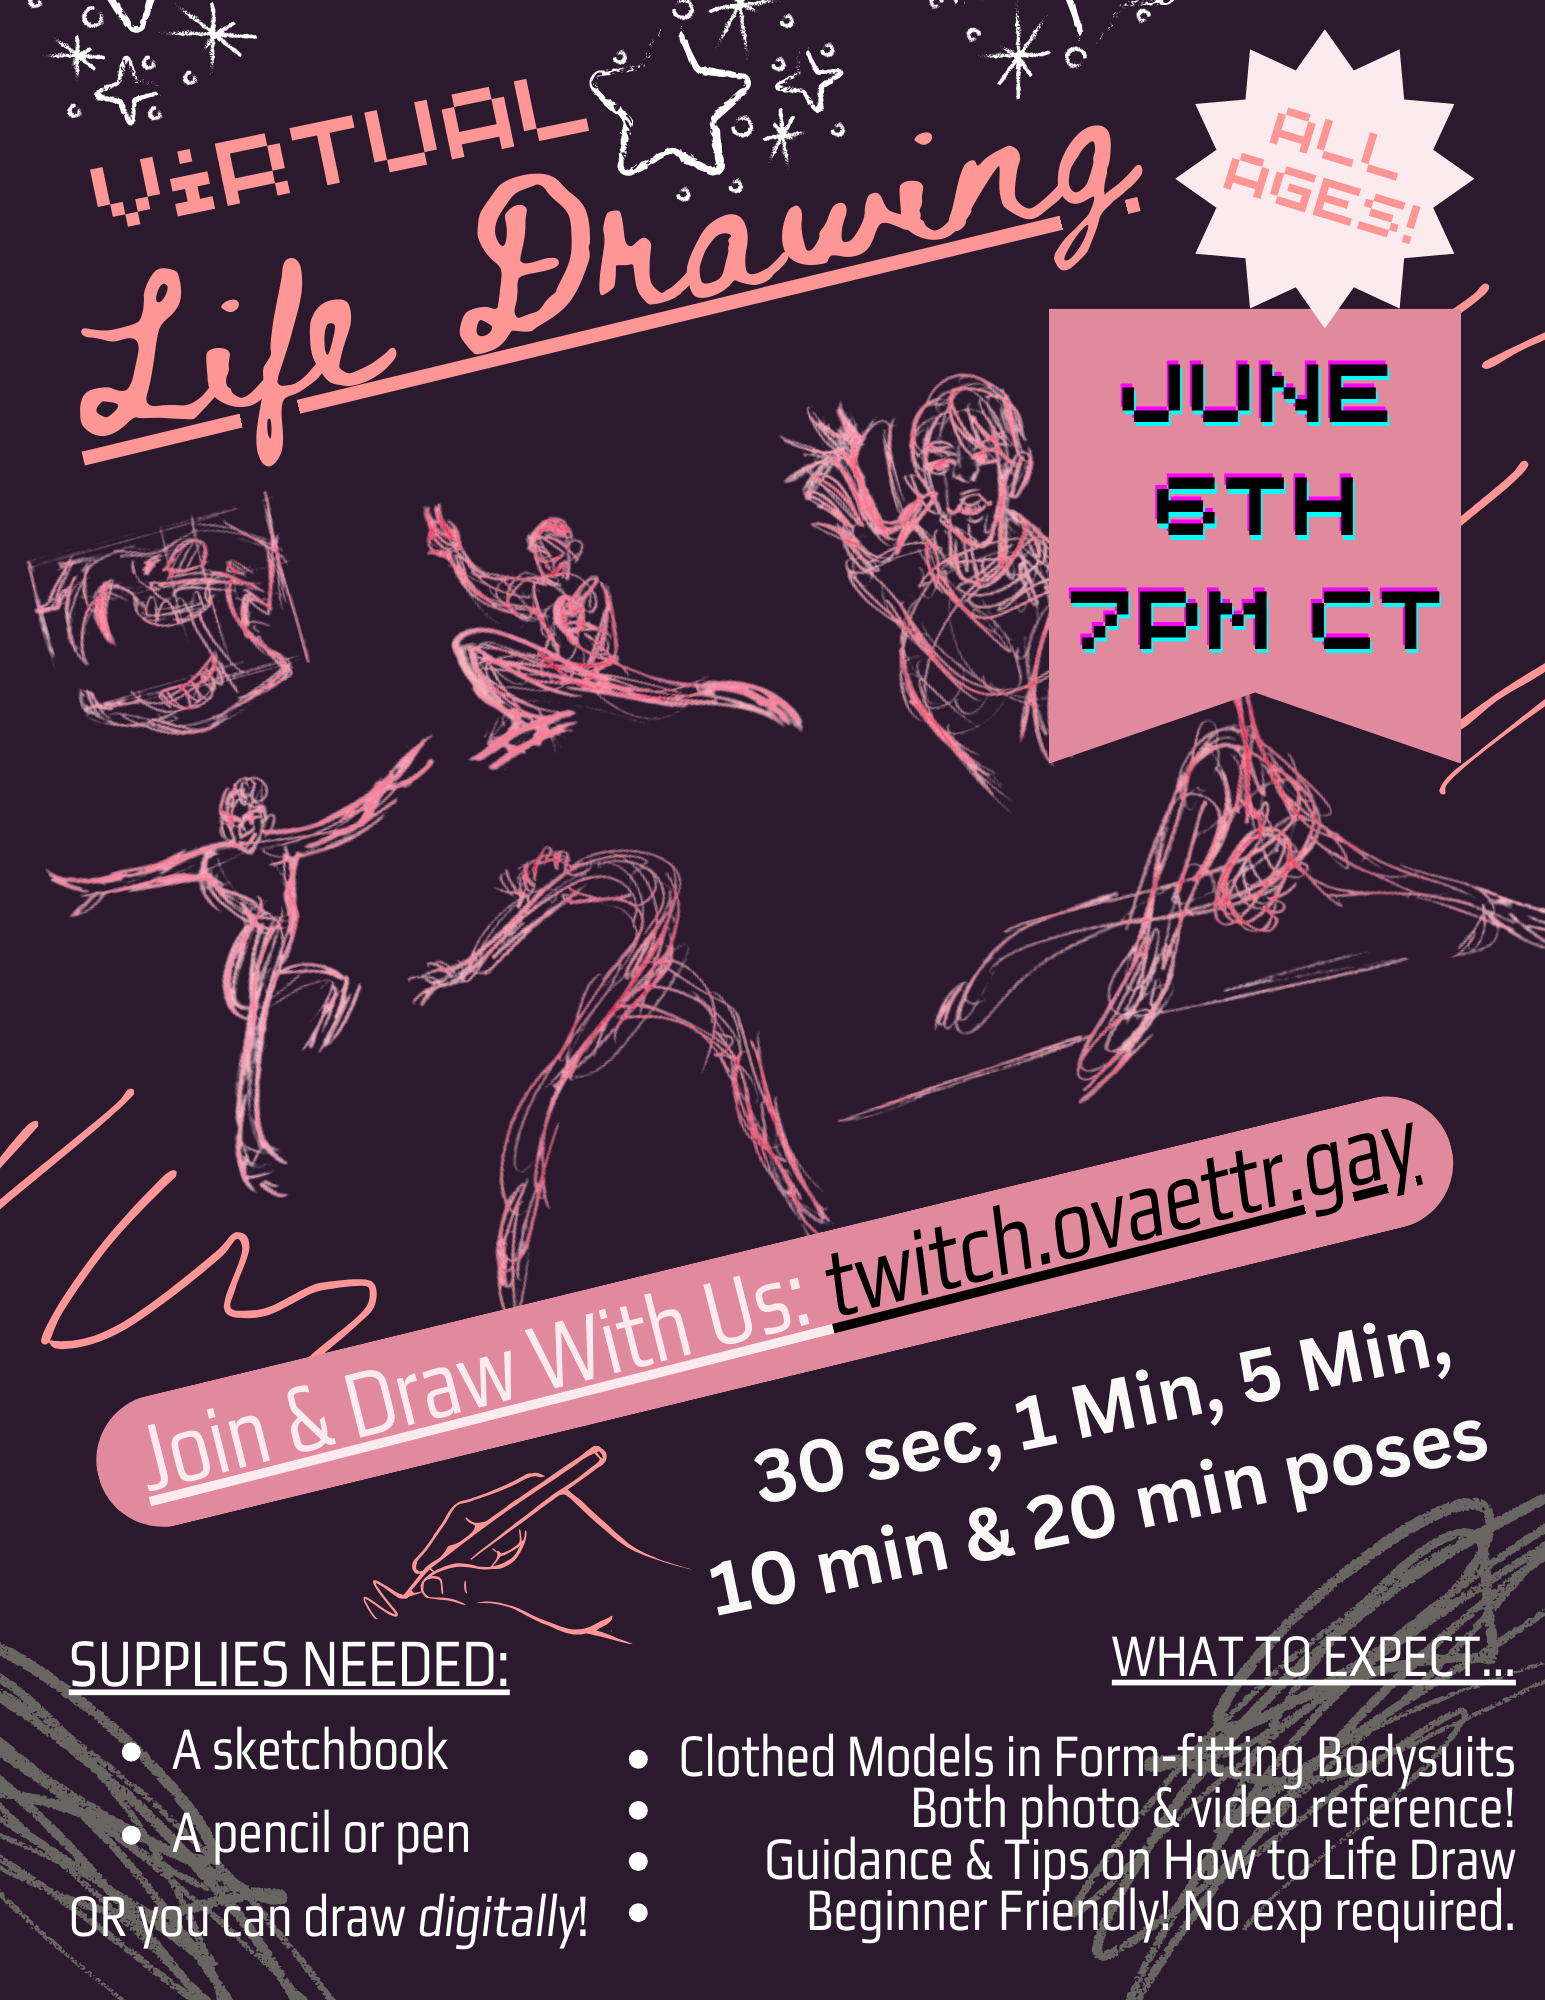 Virtual life drawing event poster